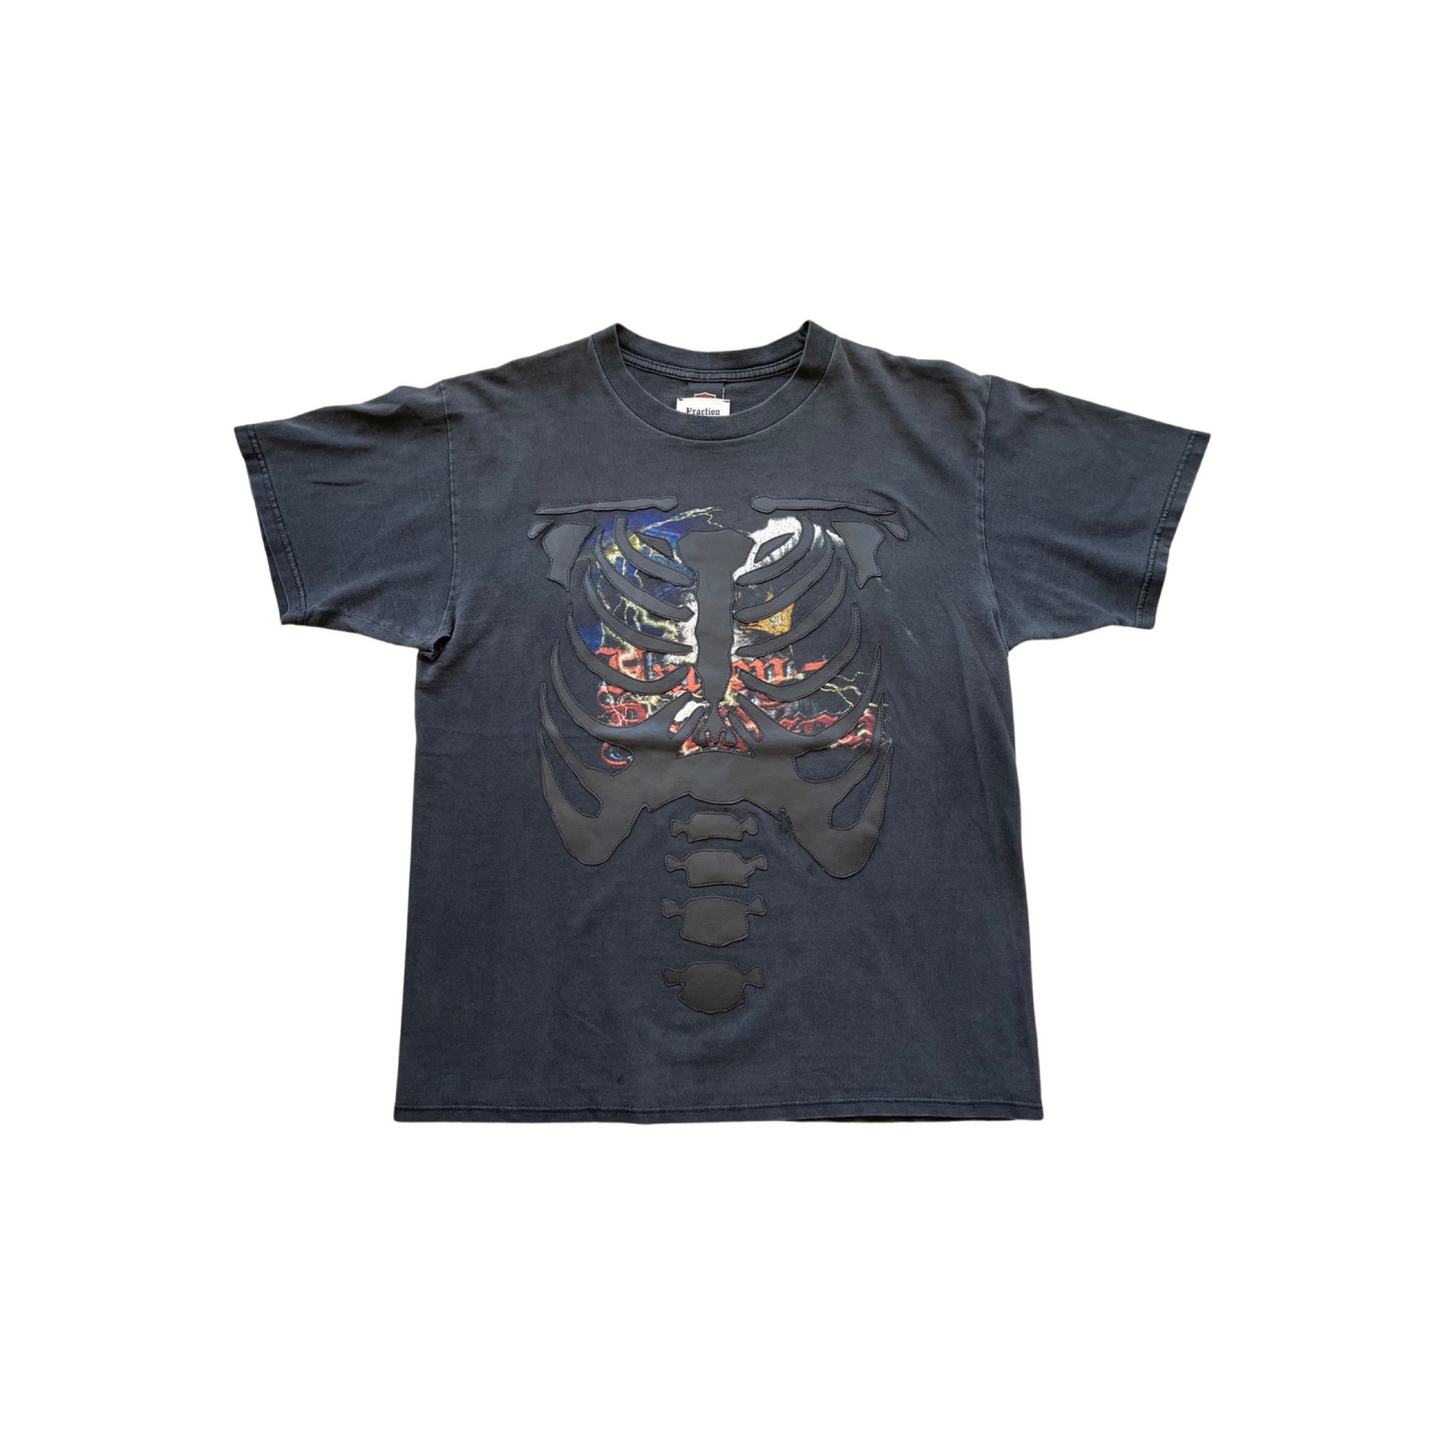 Harley Davidson Wisconsin T-shirt with Leather Ribcage Appliqué